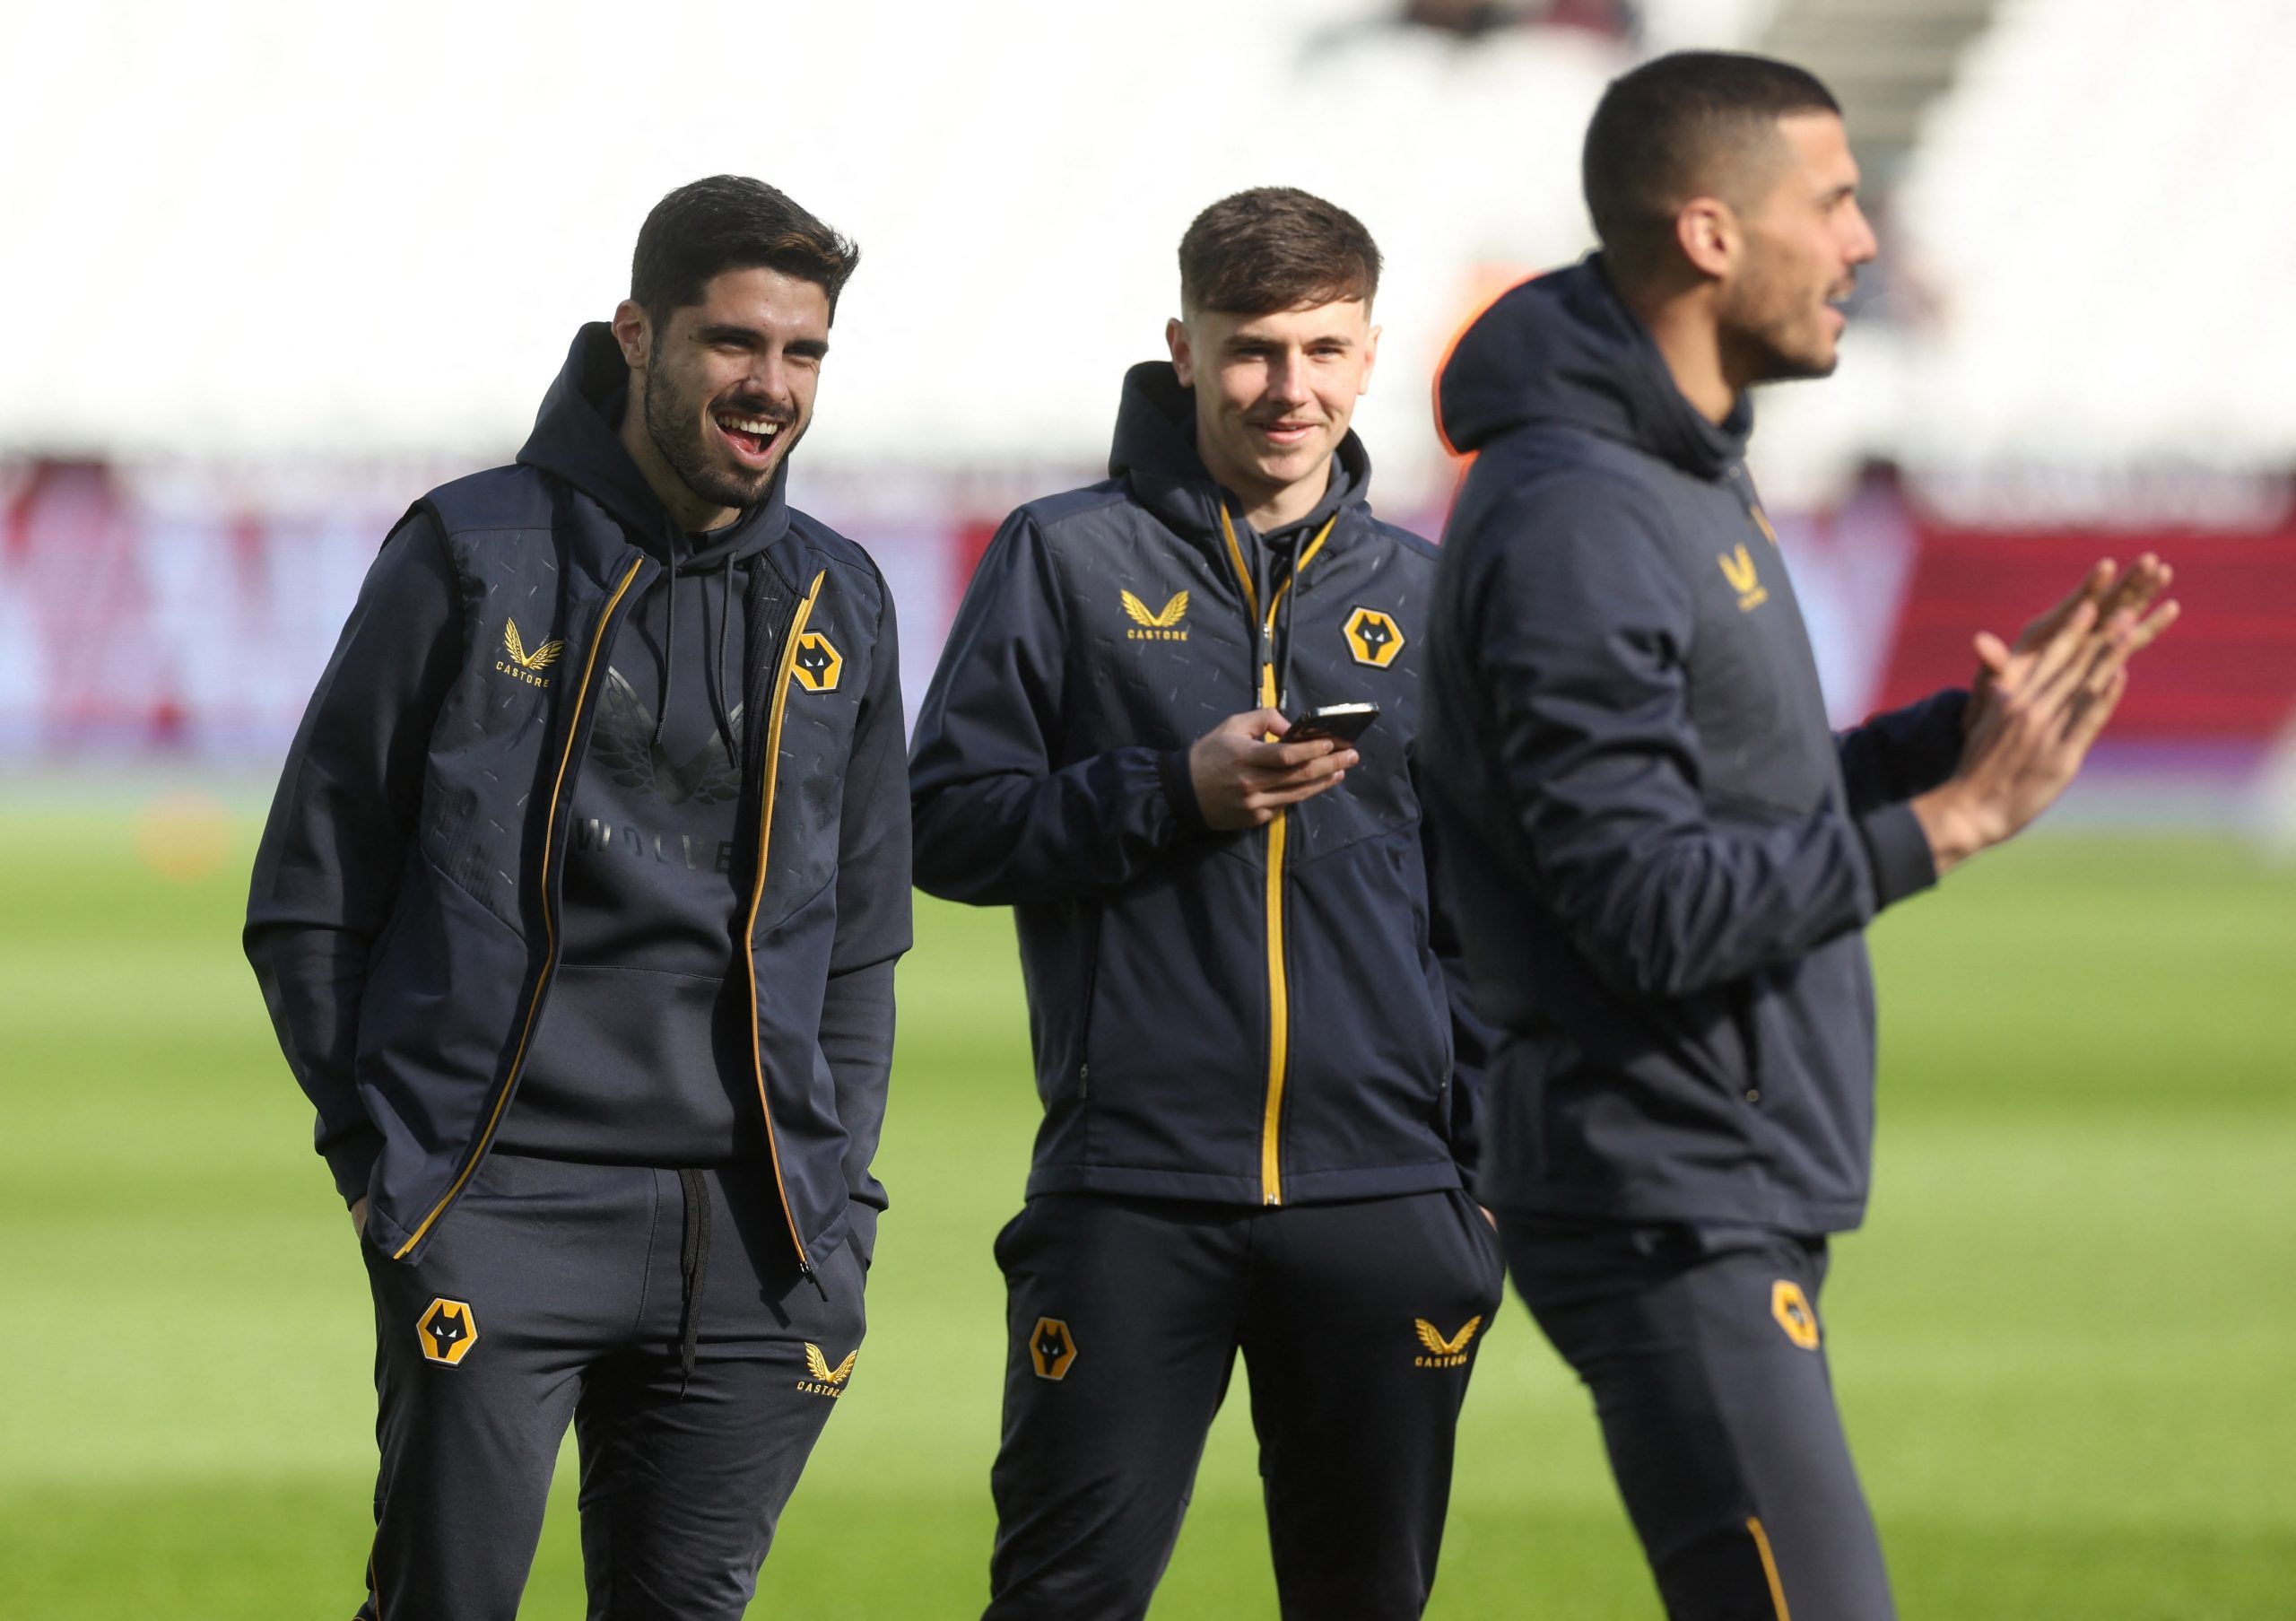 Bruno Lage, Fosun, Jeff Shi, Molineux, The Old Gold, Wolves, Wolves fans, Wolves info, Wolves latest, Wolves news, Wolves updates, WWFC, WWFC news, WWFC update, Premier League, Premier League news, Wolverhampton Wanderers, Opportunity knocks, Luke Cundle, Ruben Neves, 
